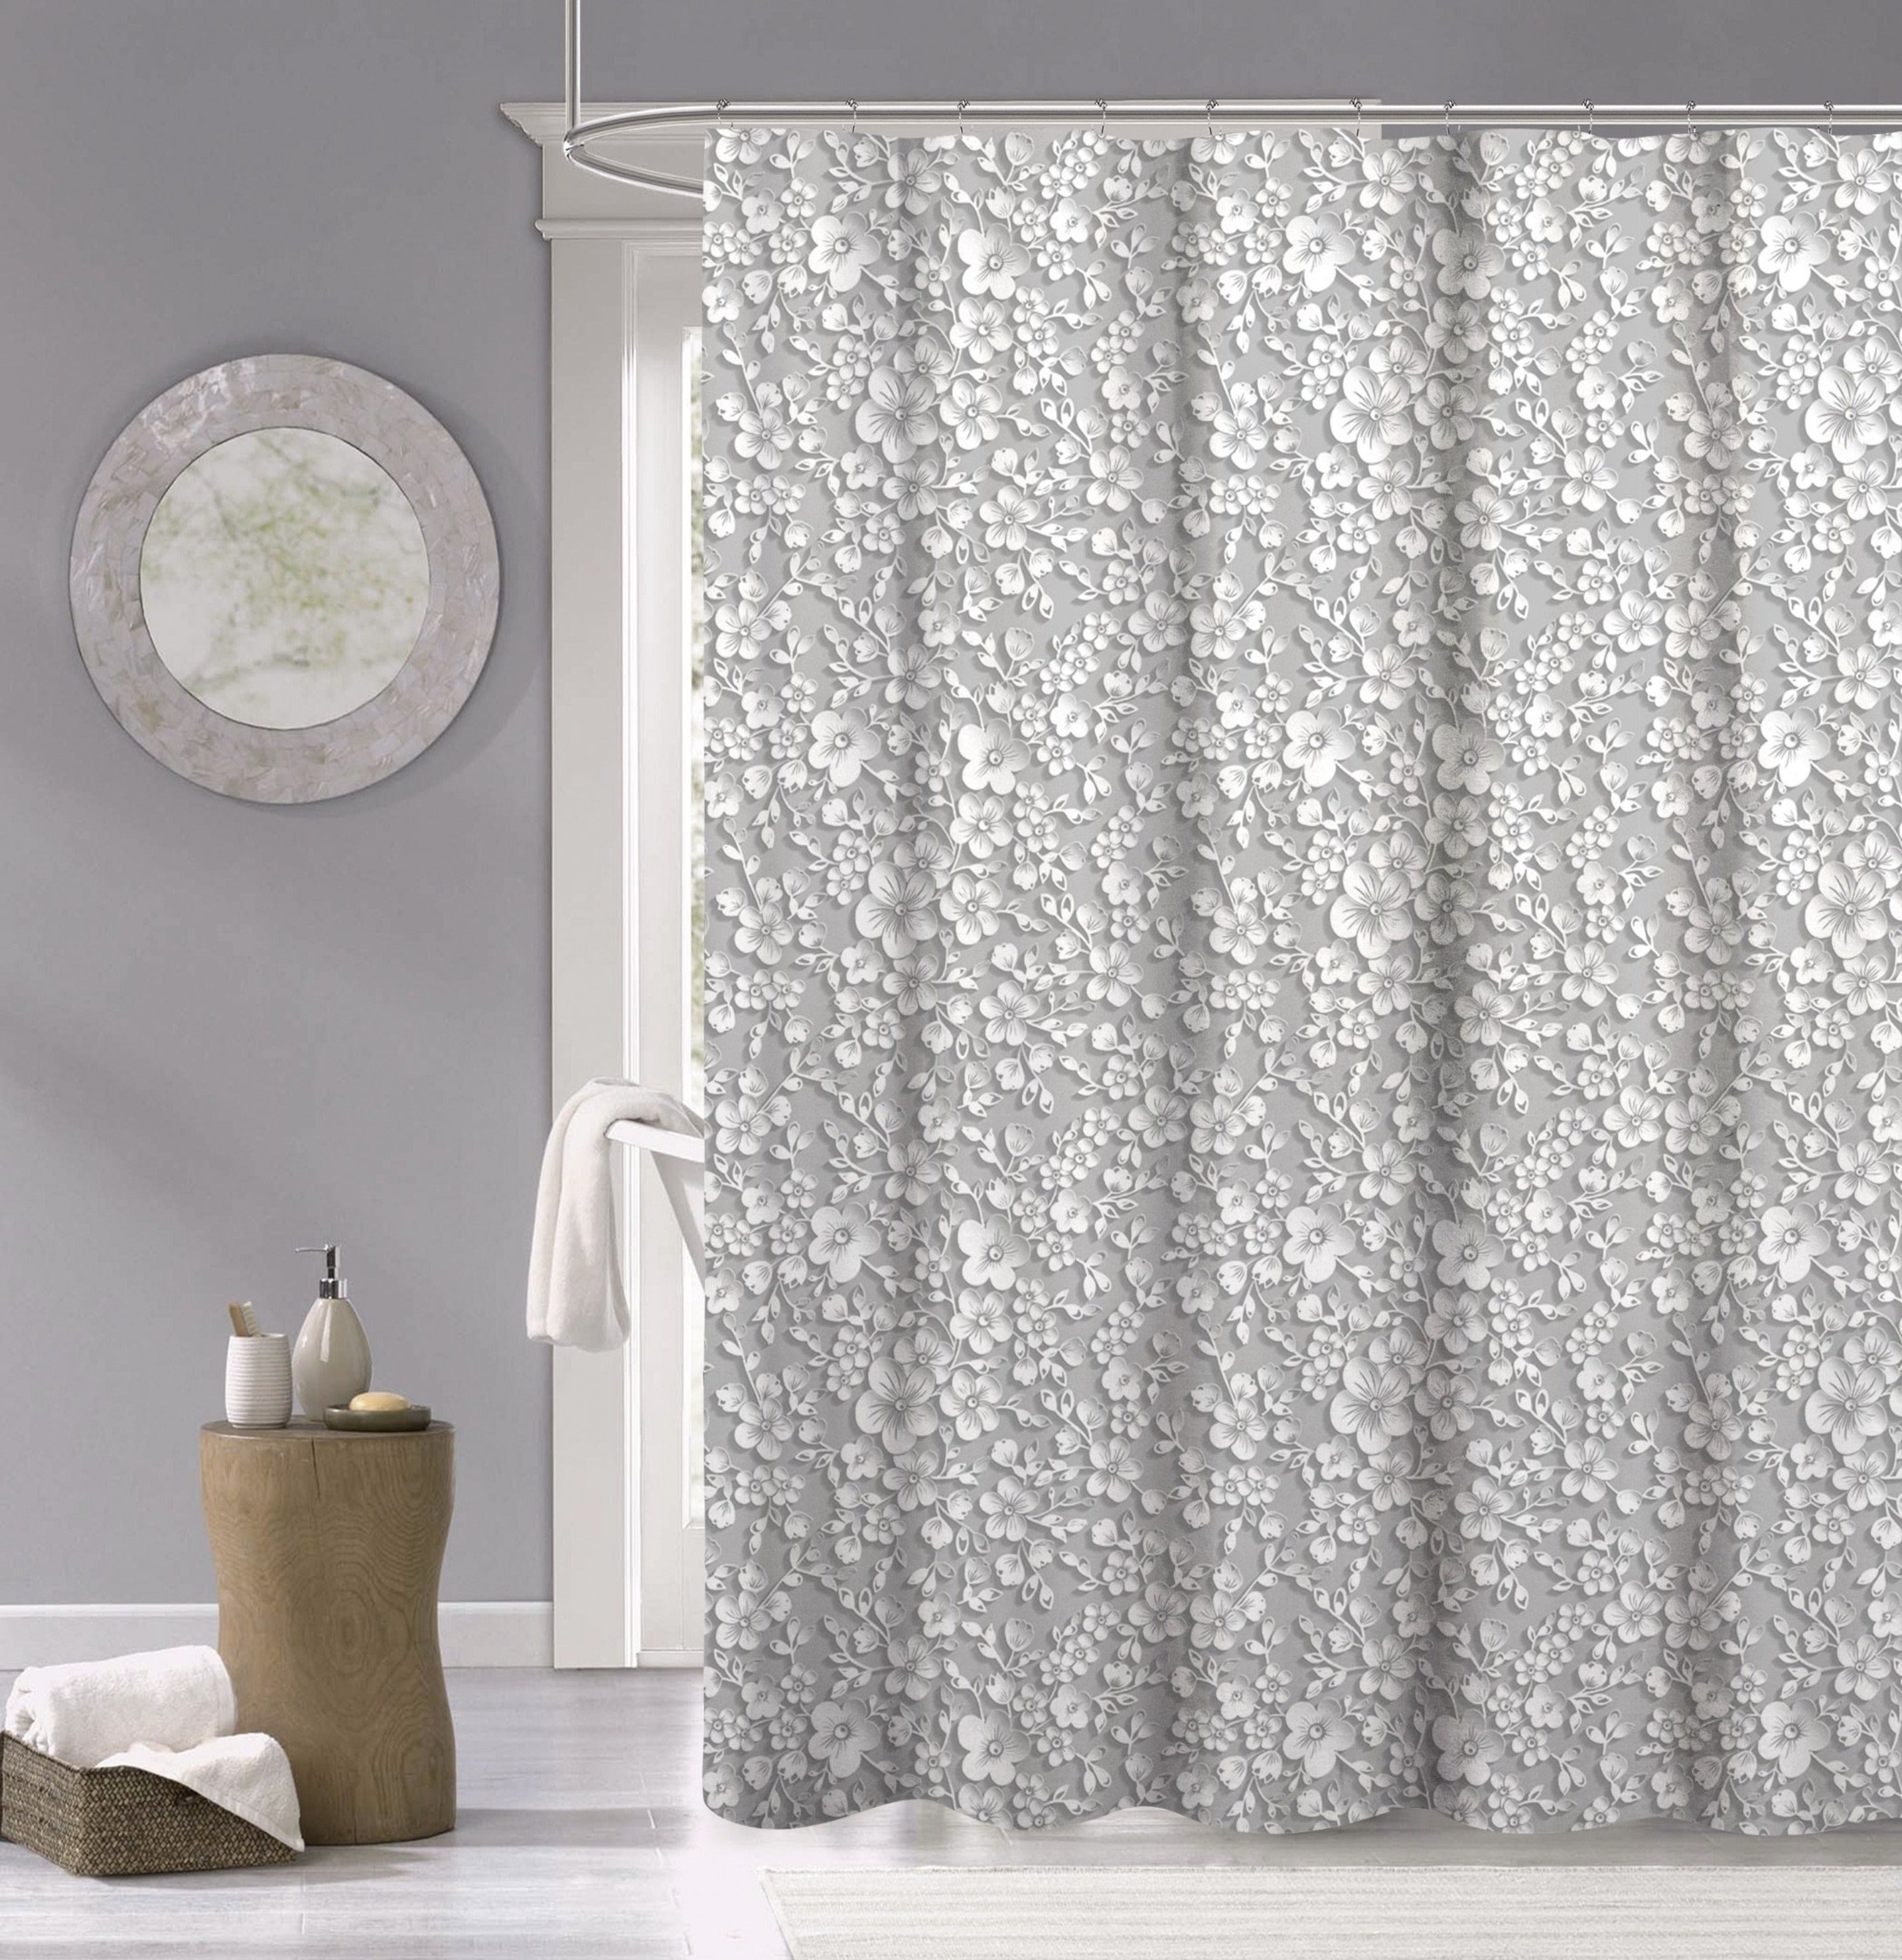 Dainty Home 100% Cotton  Floral 3d Look Fabric Shower Curtain, 70''W x 72''L, White